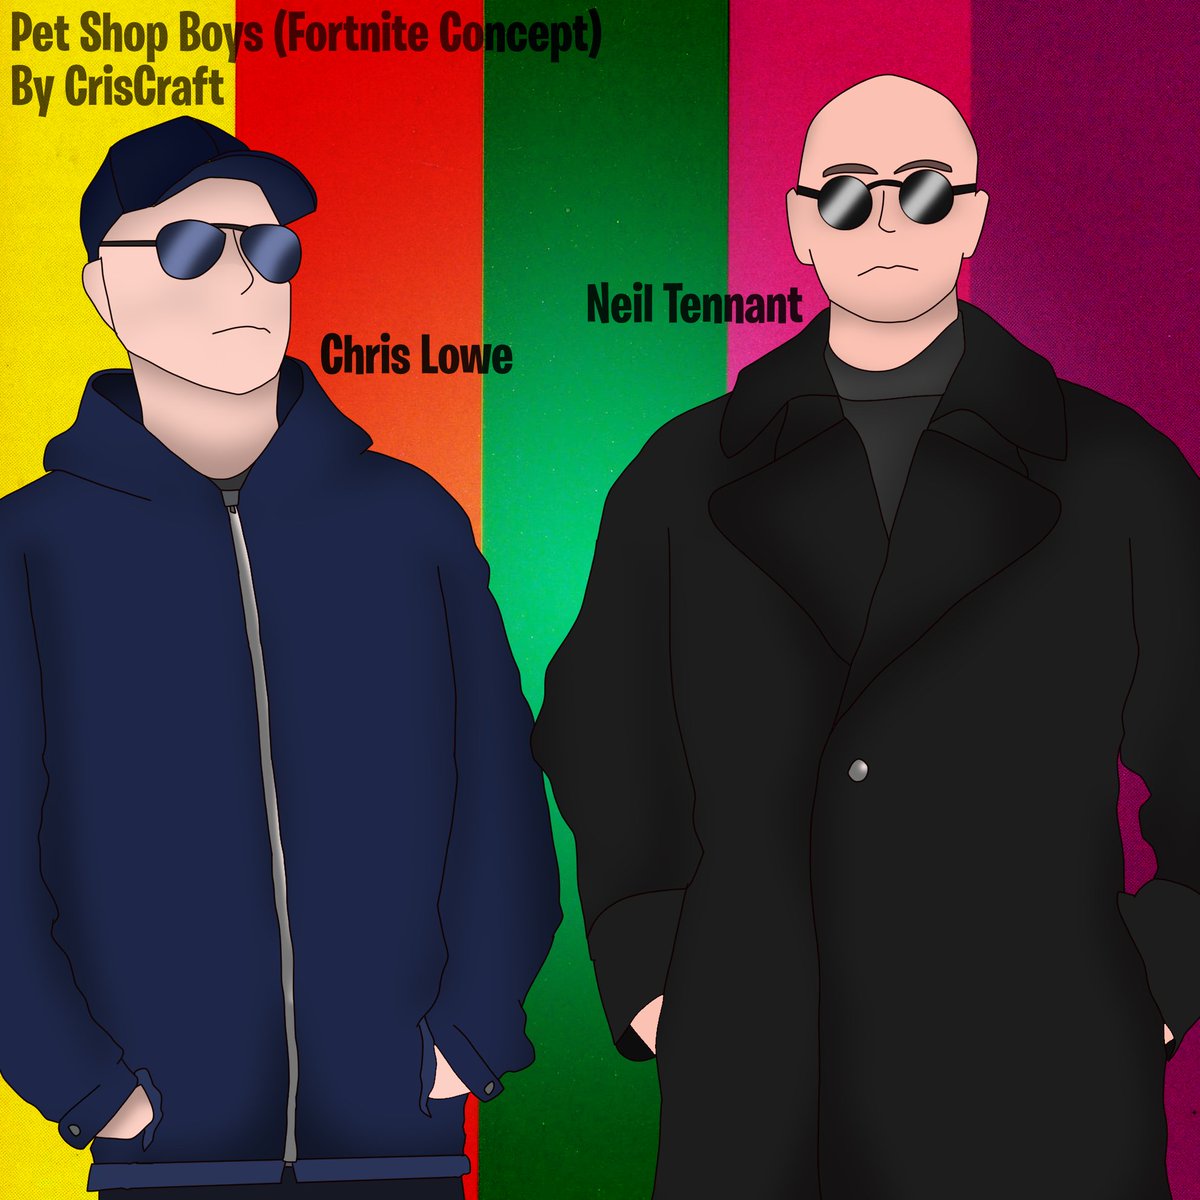 Celebrating their new album 'Nonetheless'!
I present to you:

Pet Shop Boys!

[New Skin Versions] (Including Neil Tennant And Chris Lowe Outfits!) They need to find their new bohemia..
#FortniteConcept #FortniteArt #Fortnite #PetShopBoys #PetHeads